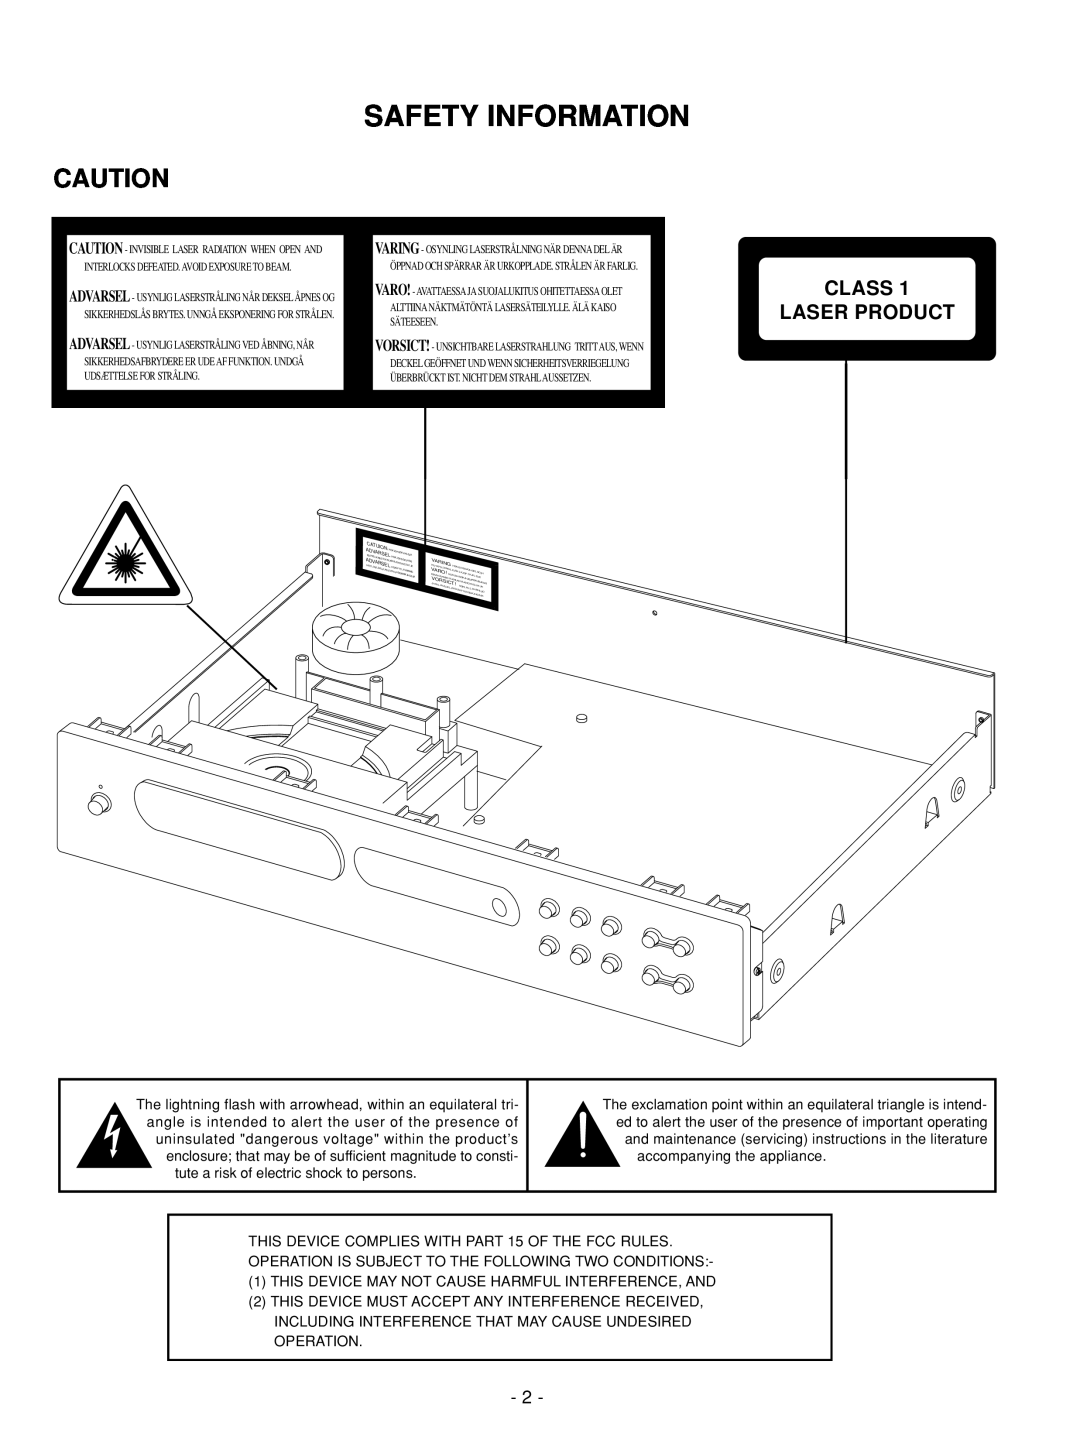 NAD C 542 service manual Safety Information, Class Laser Product 